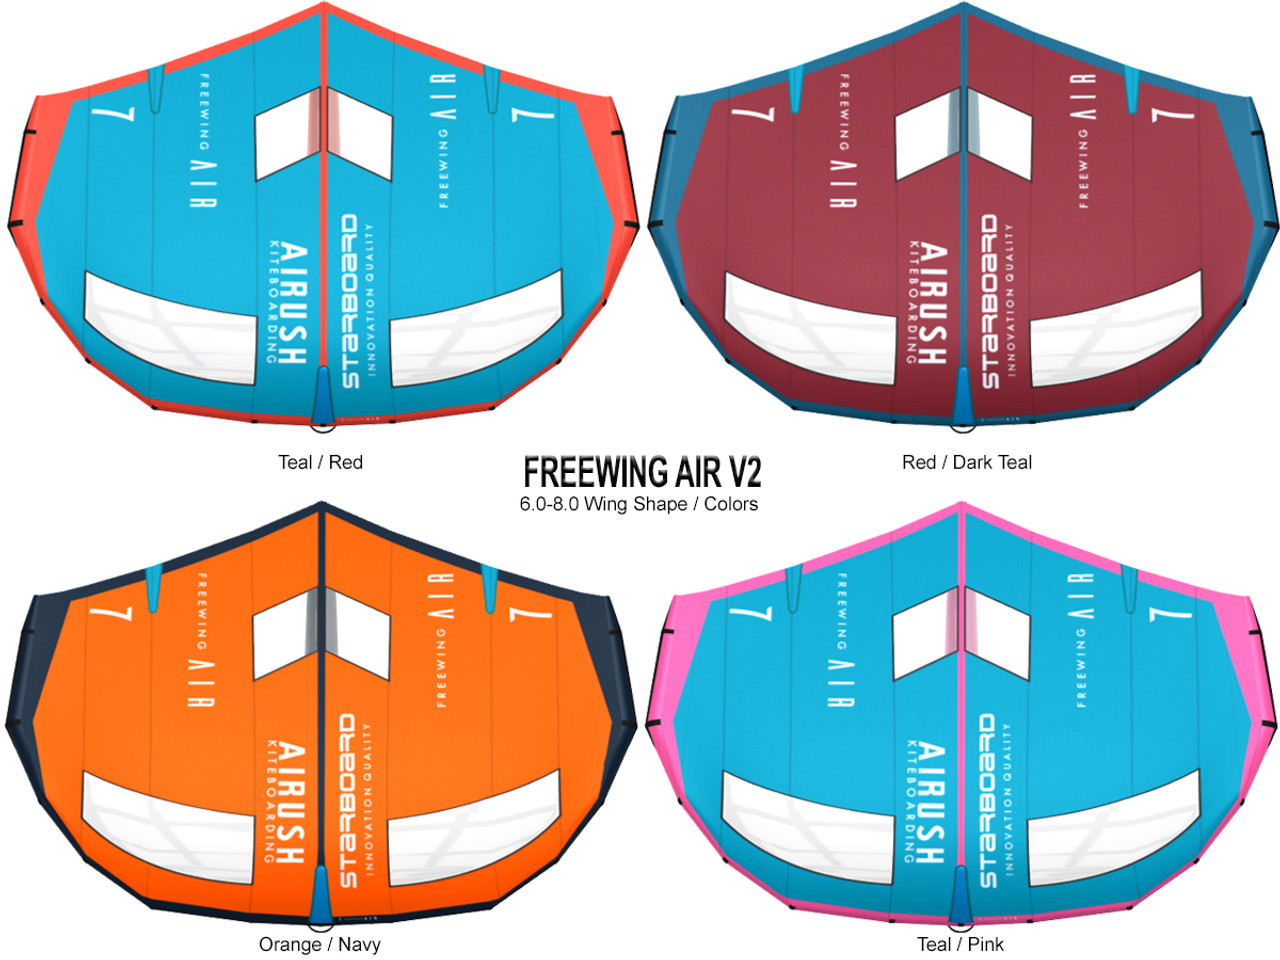 STARBOARD FREEWING AIR V2